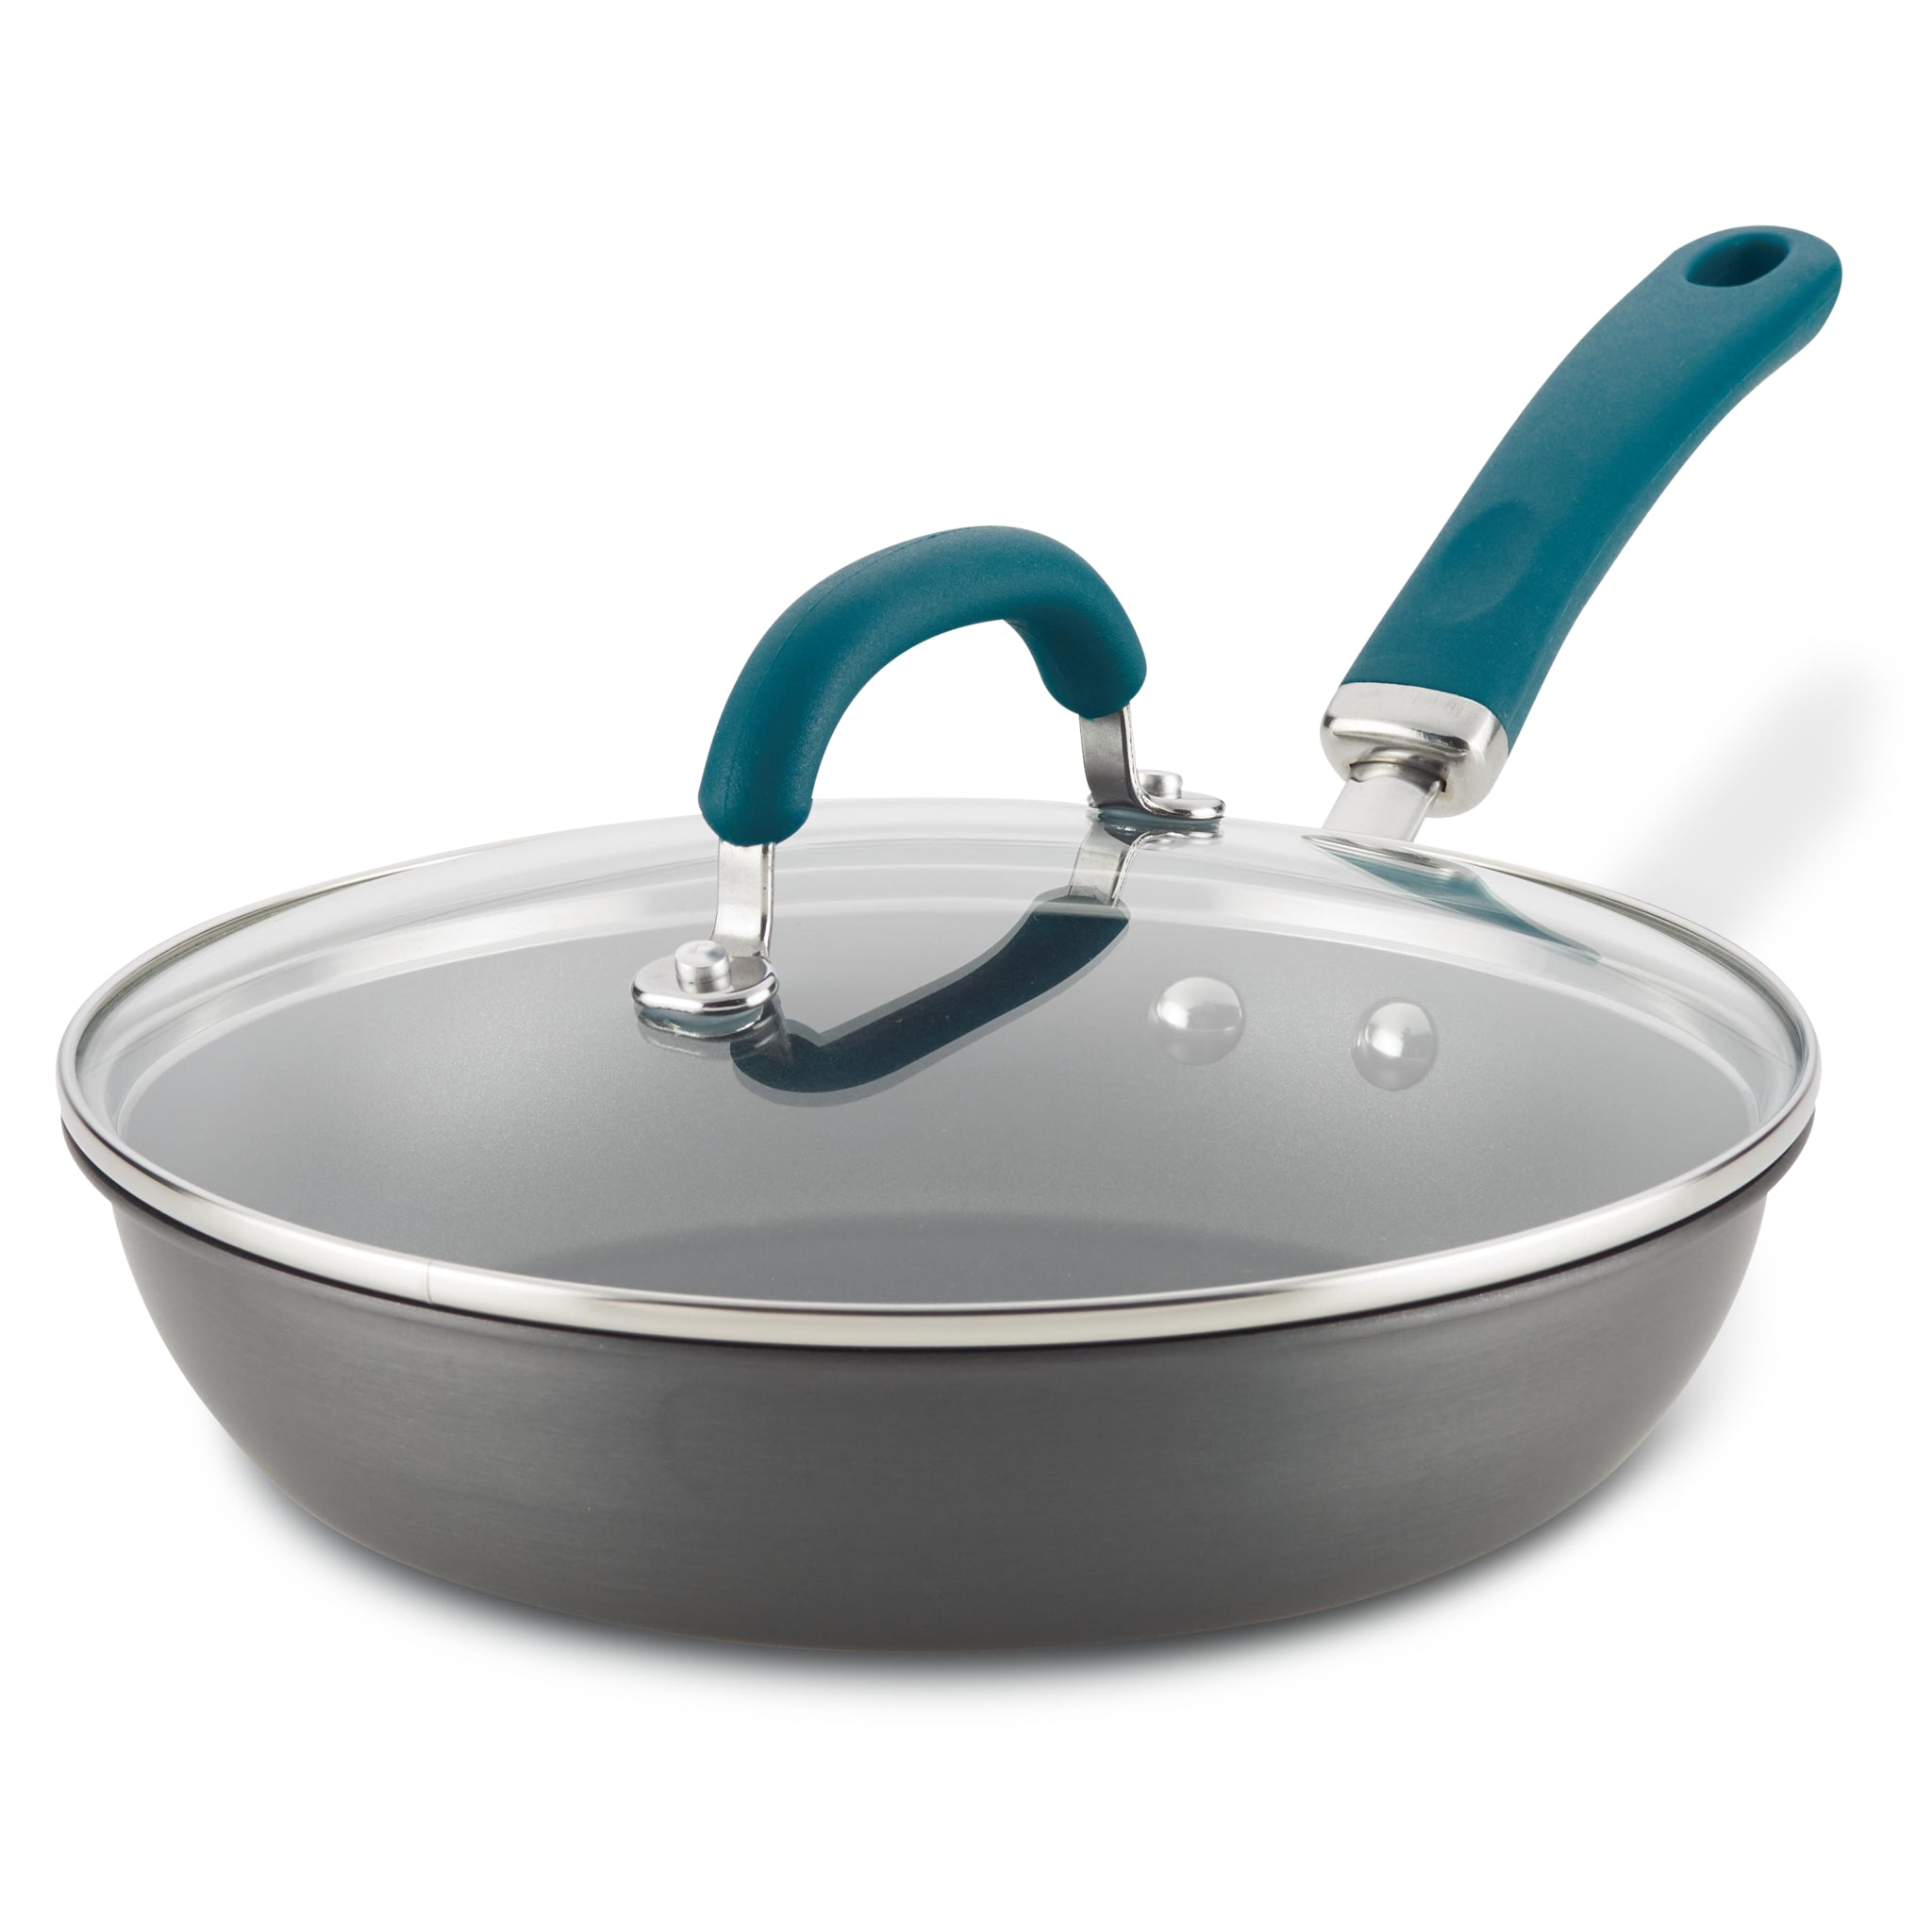 10.25-Inch Hard Anodized Nonstick Induction Covered Deep Frying Pan